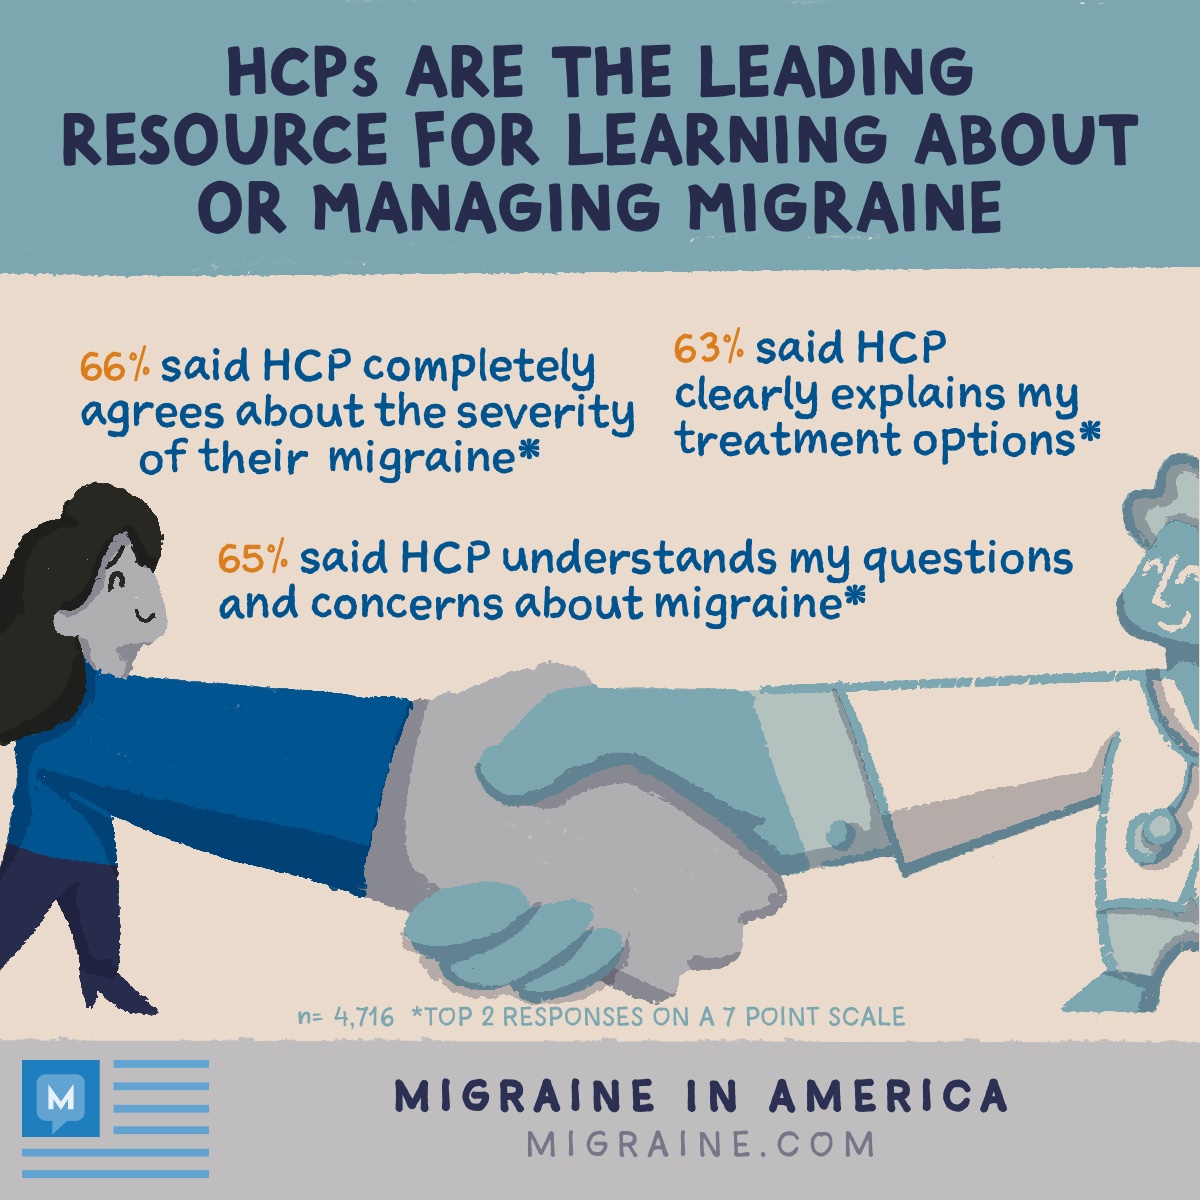 Percentage of survey respondents who shared they have a good relationship with their current HCPs for managing migraine